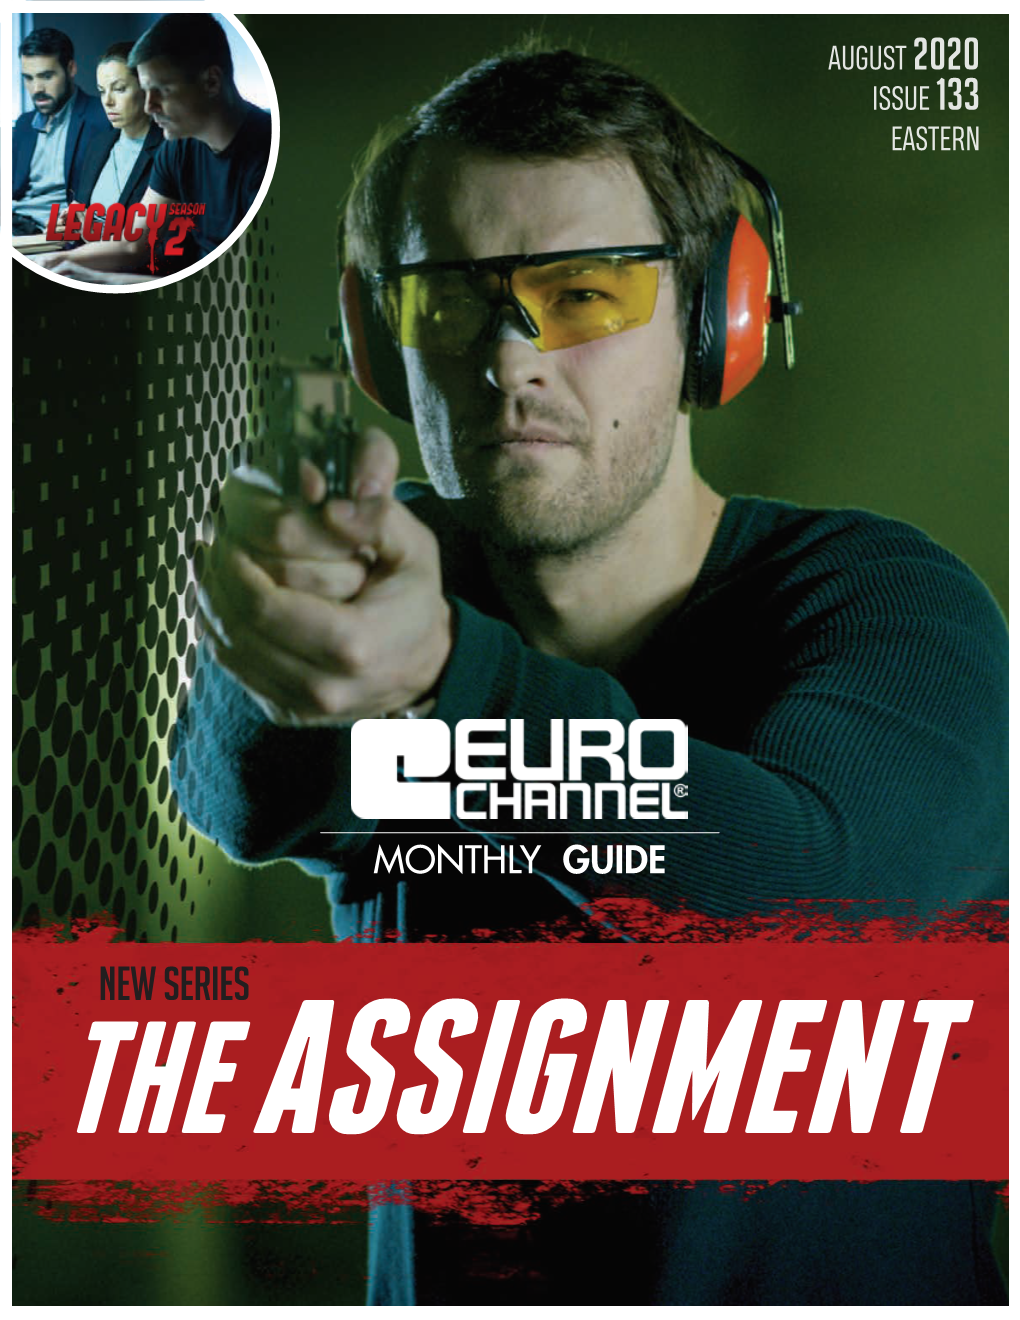 NEW SERIES the Assignment